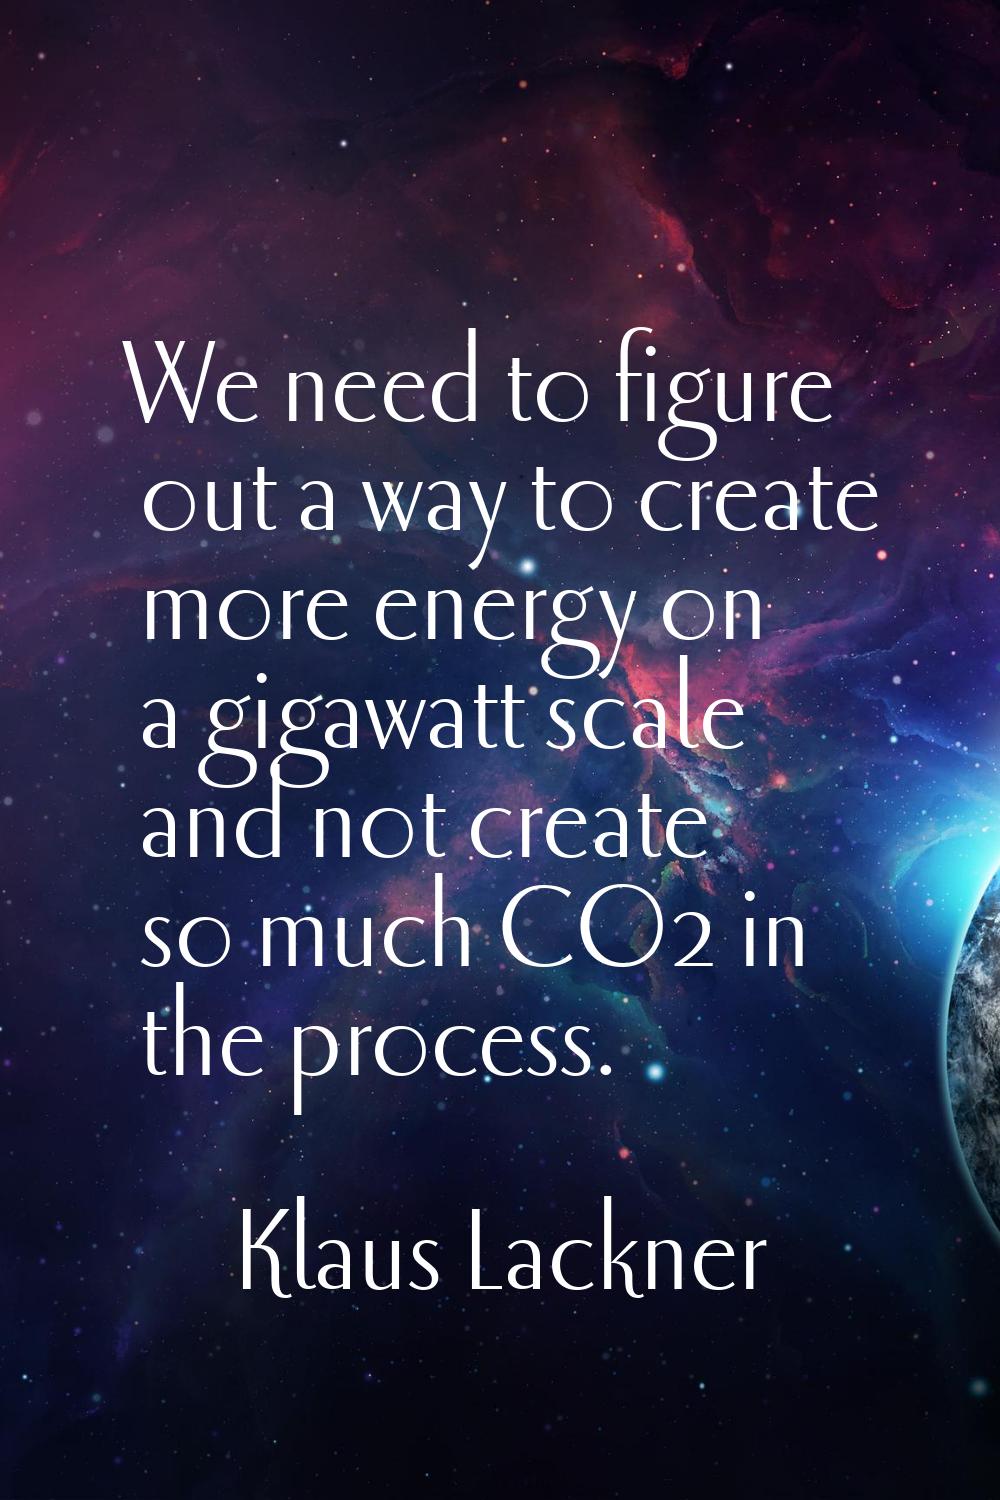 We need to figure out a way to create more energy on a gigawatt scale and not create so much CO2 in